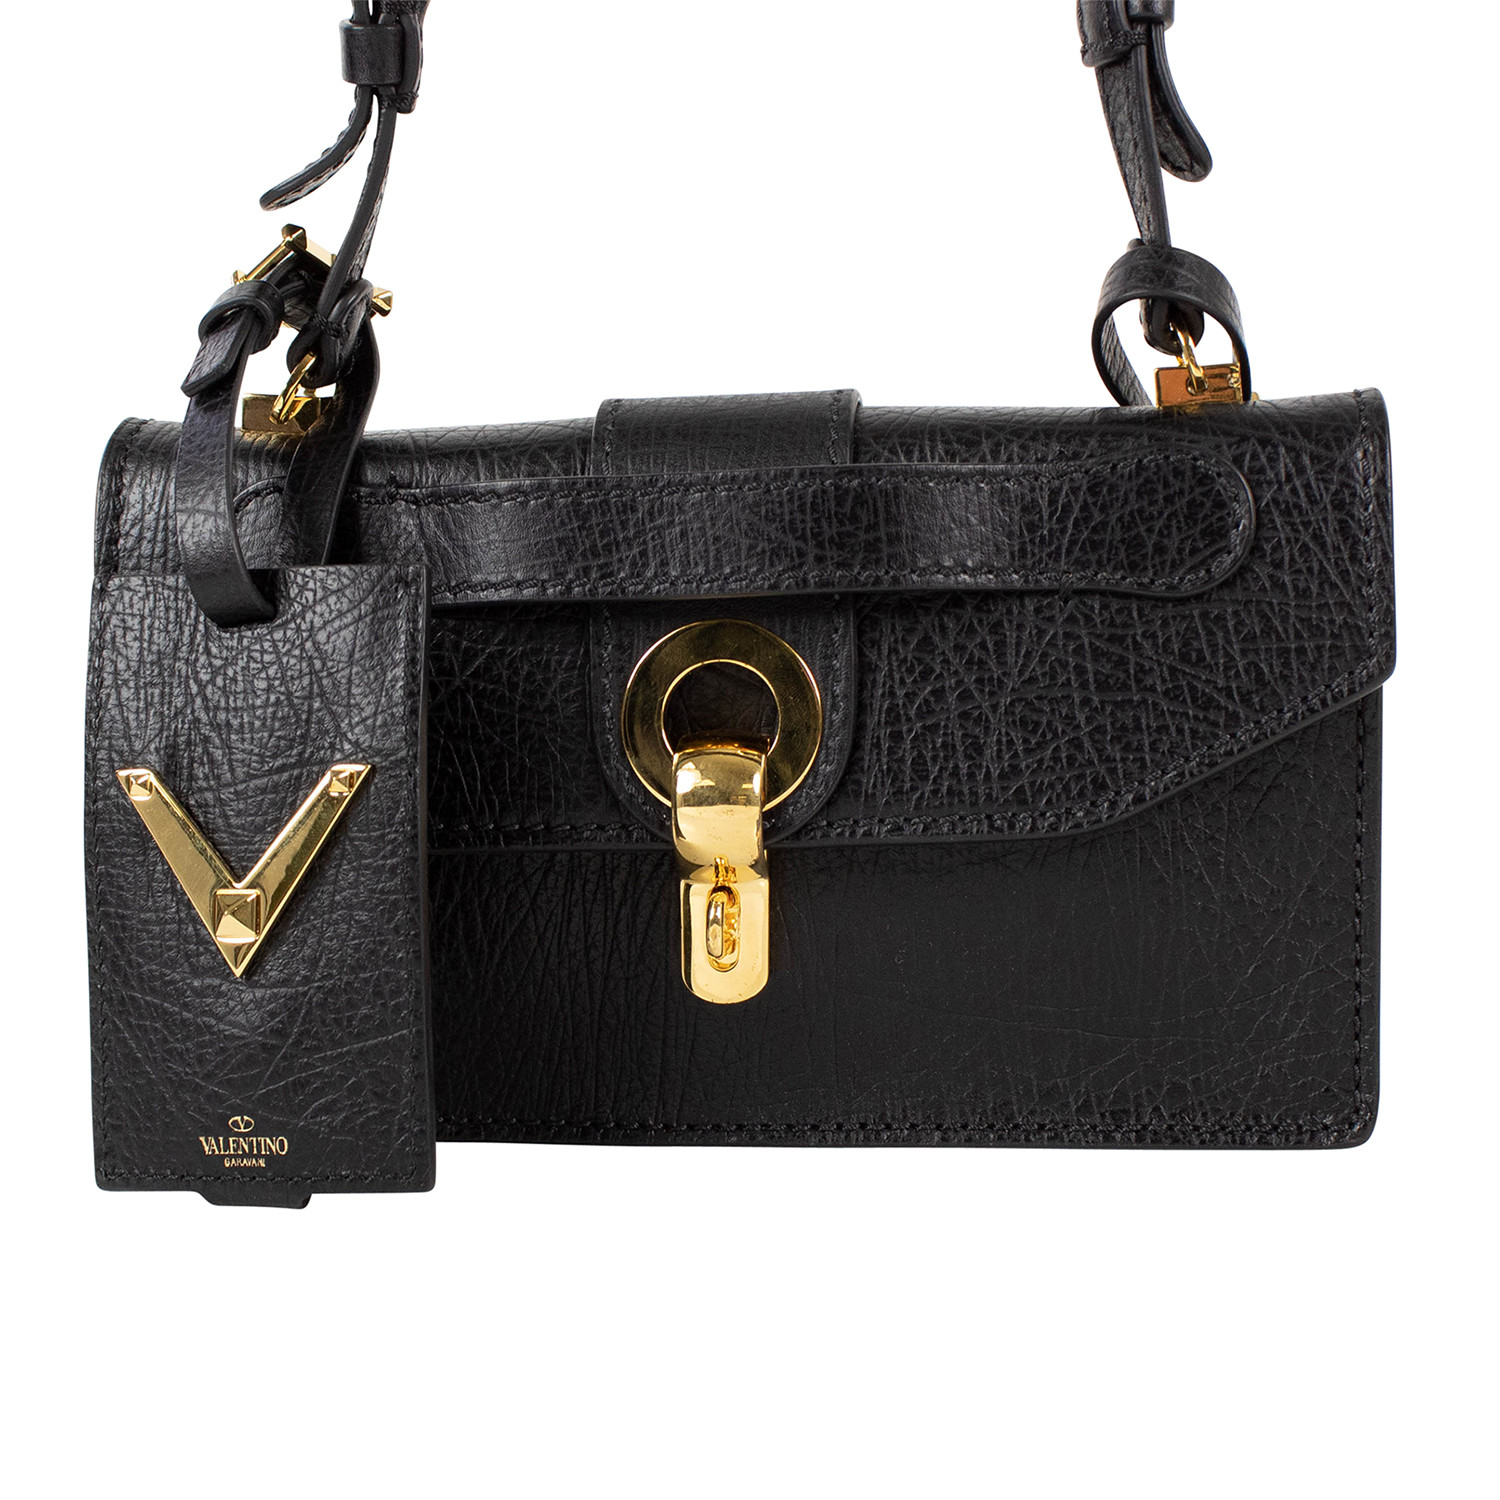 Black Gold Rockstud Leather With Chain Strap Cross Body Bag - Valentino - Touch of Modern